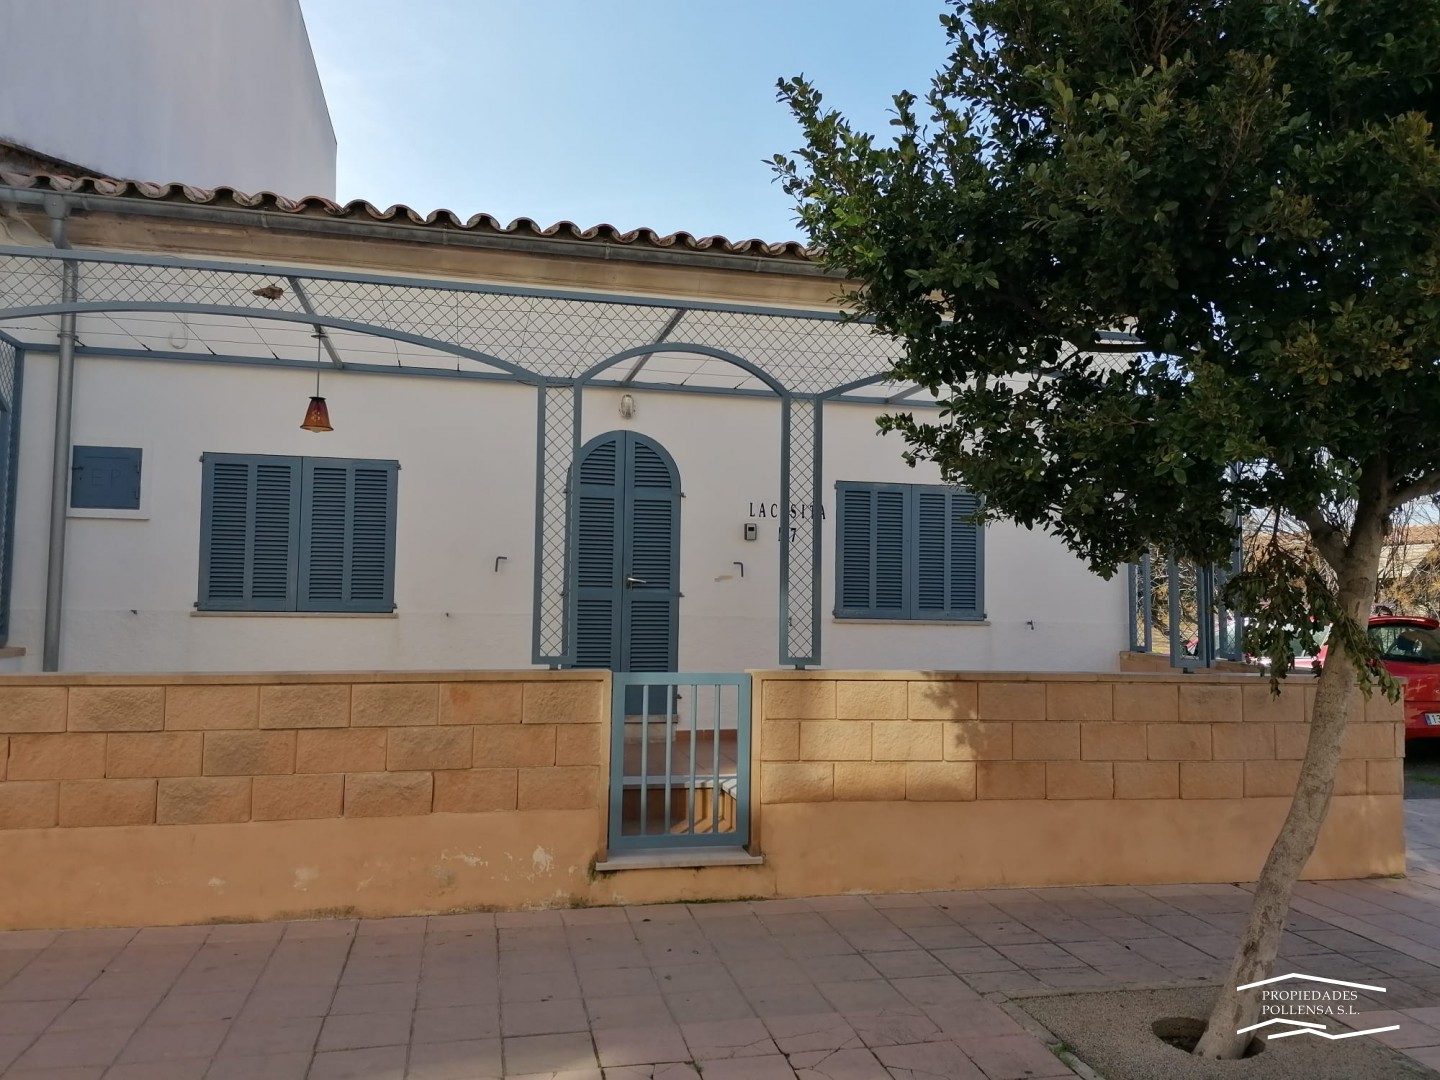 OLD FISHERMAN'S HOUSE COMPLETELY RENOVATED IN PUERTO POLLENSA.